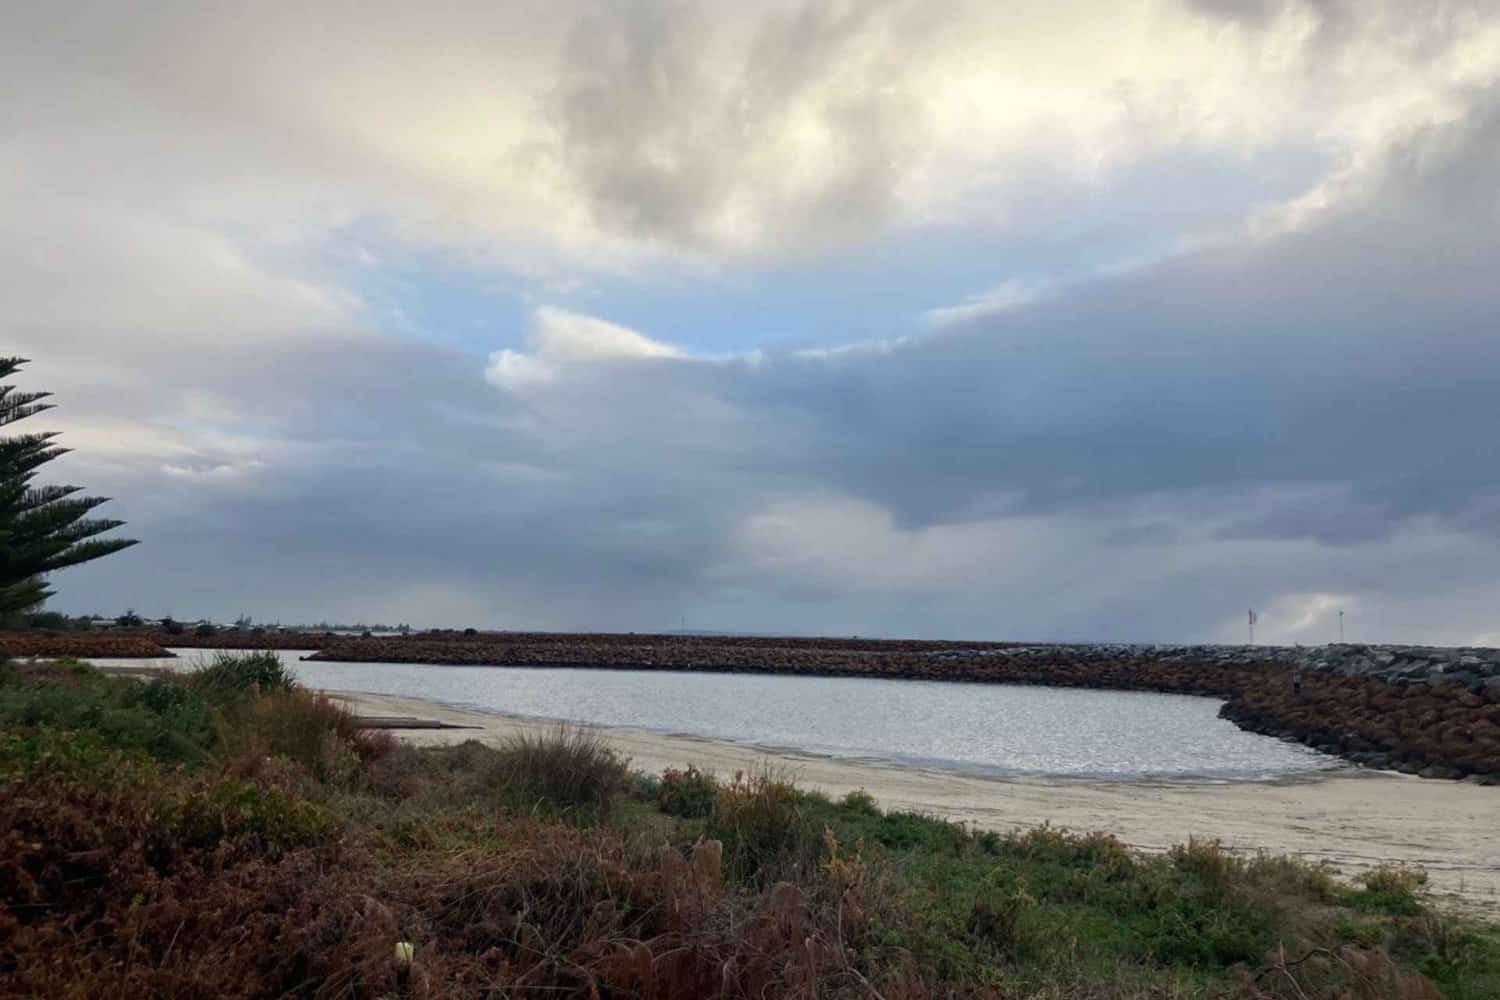 Moody skies over the calm inlet at Busselton beaches, with a protective breakwater and coastal vegetation.